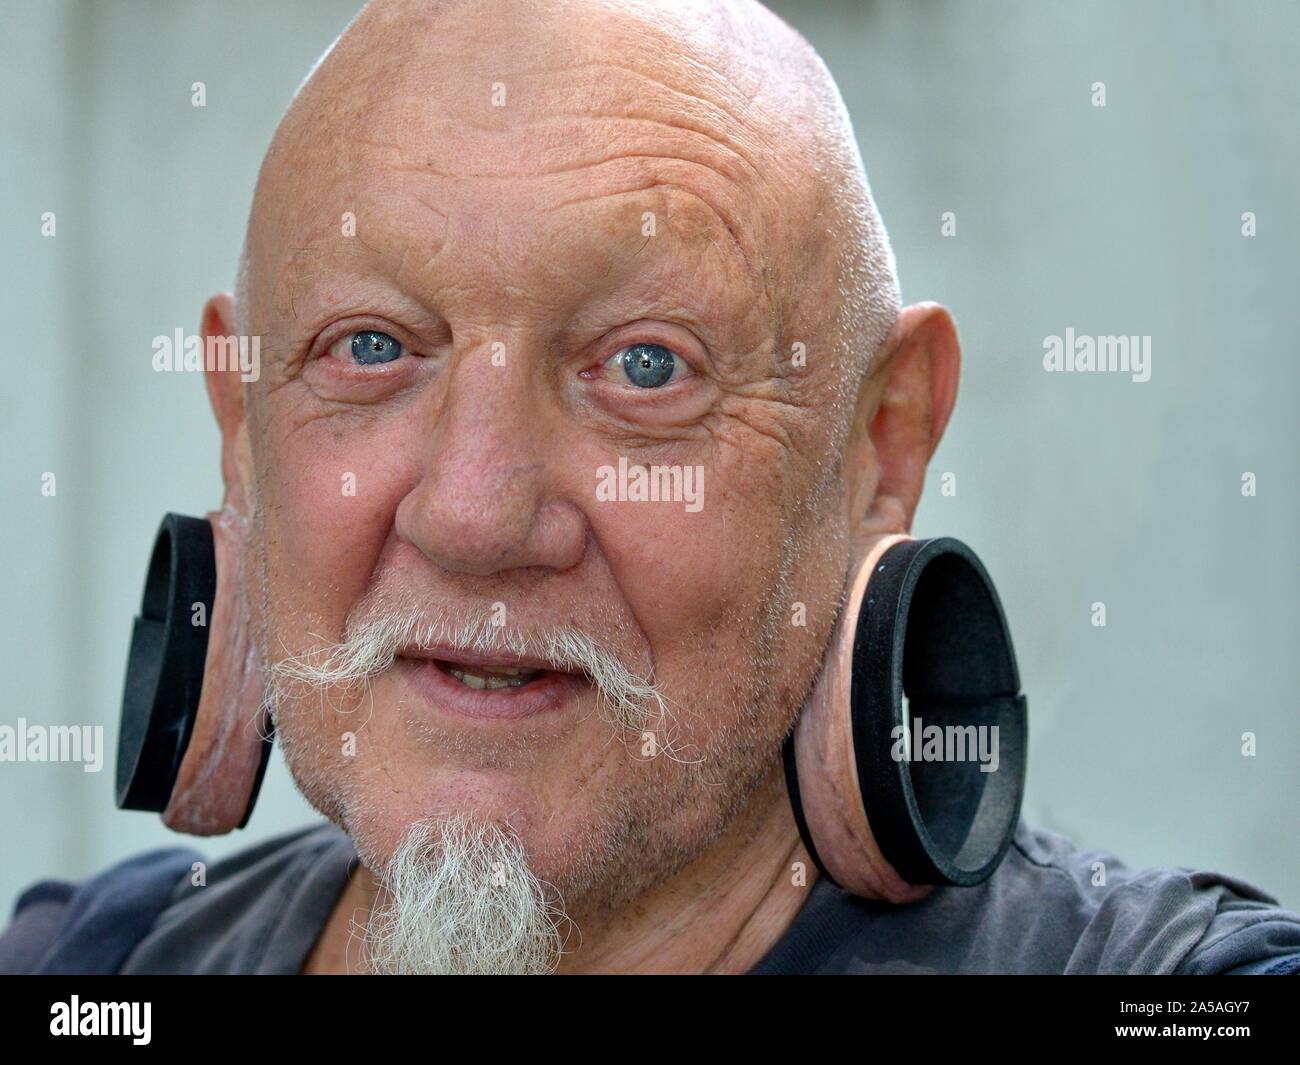 Elderly Caucasian man with huge elongated earlobes smiles for the camera. Stock Photo